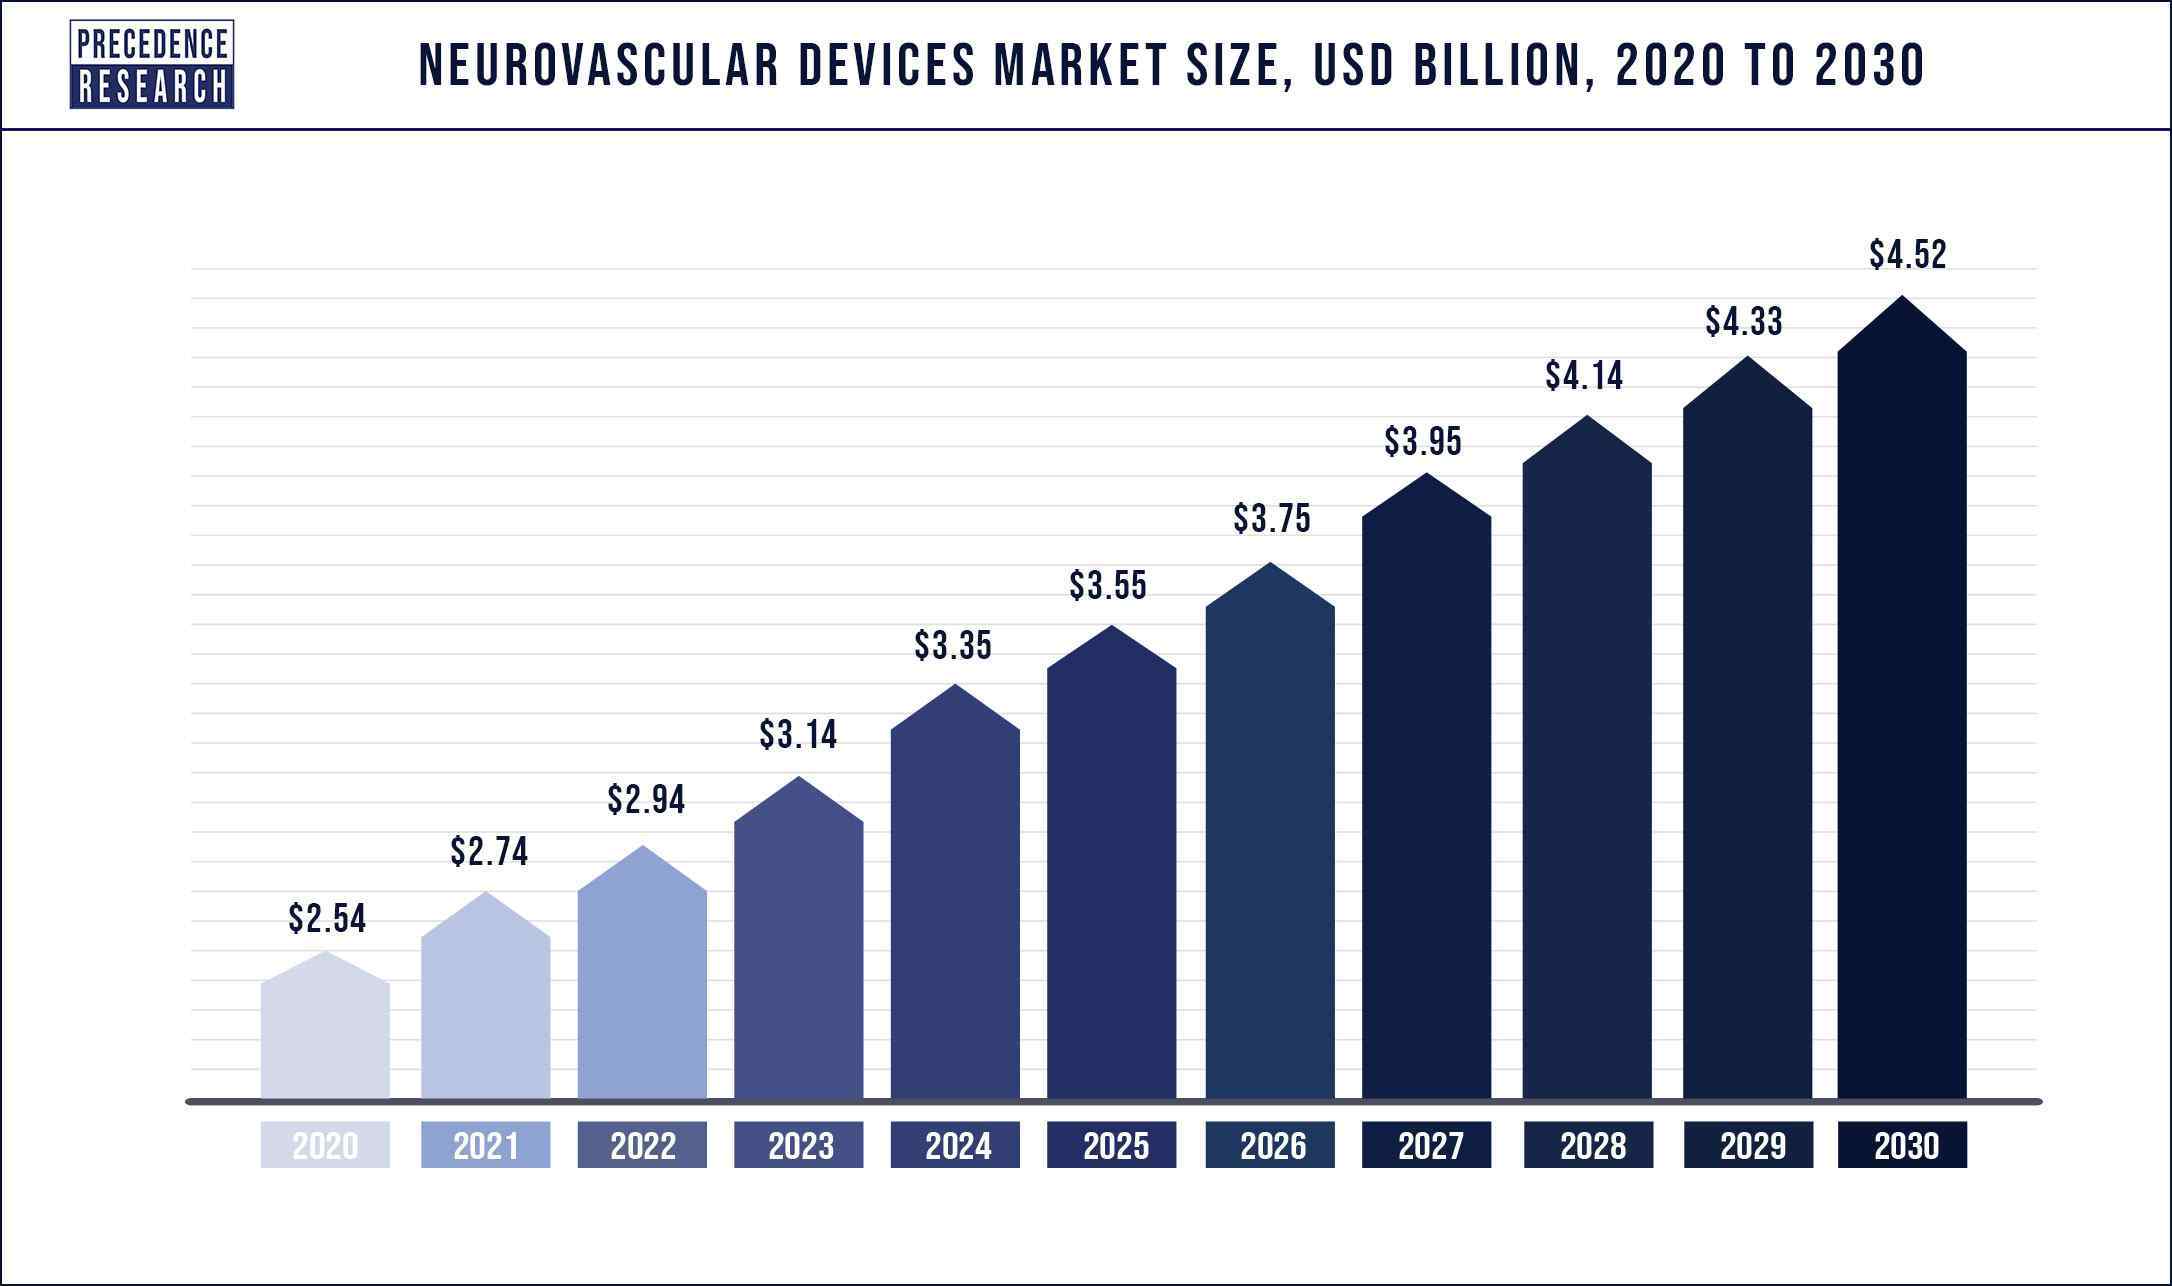 Neurovascular Devices Market Size 2020 to 2030